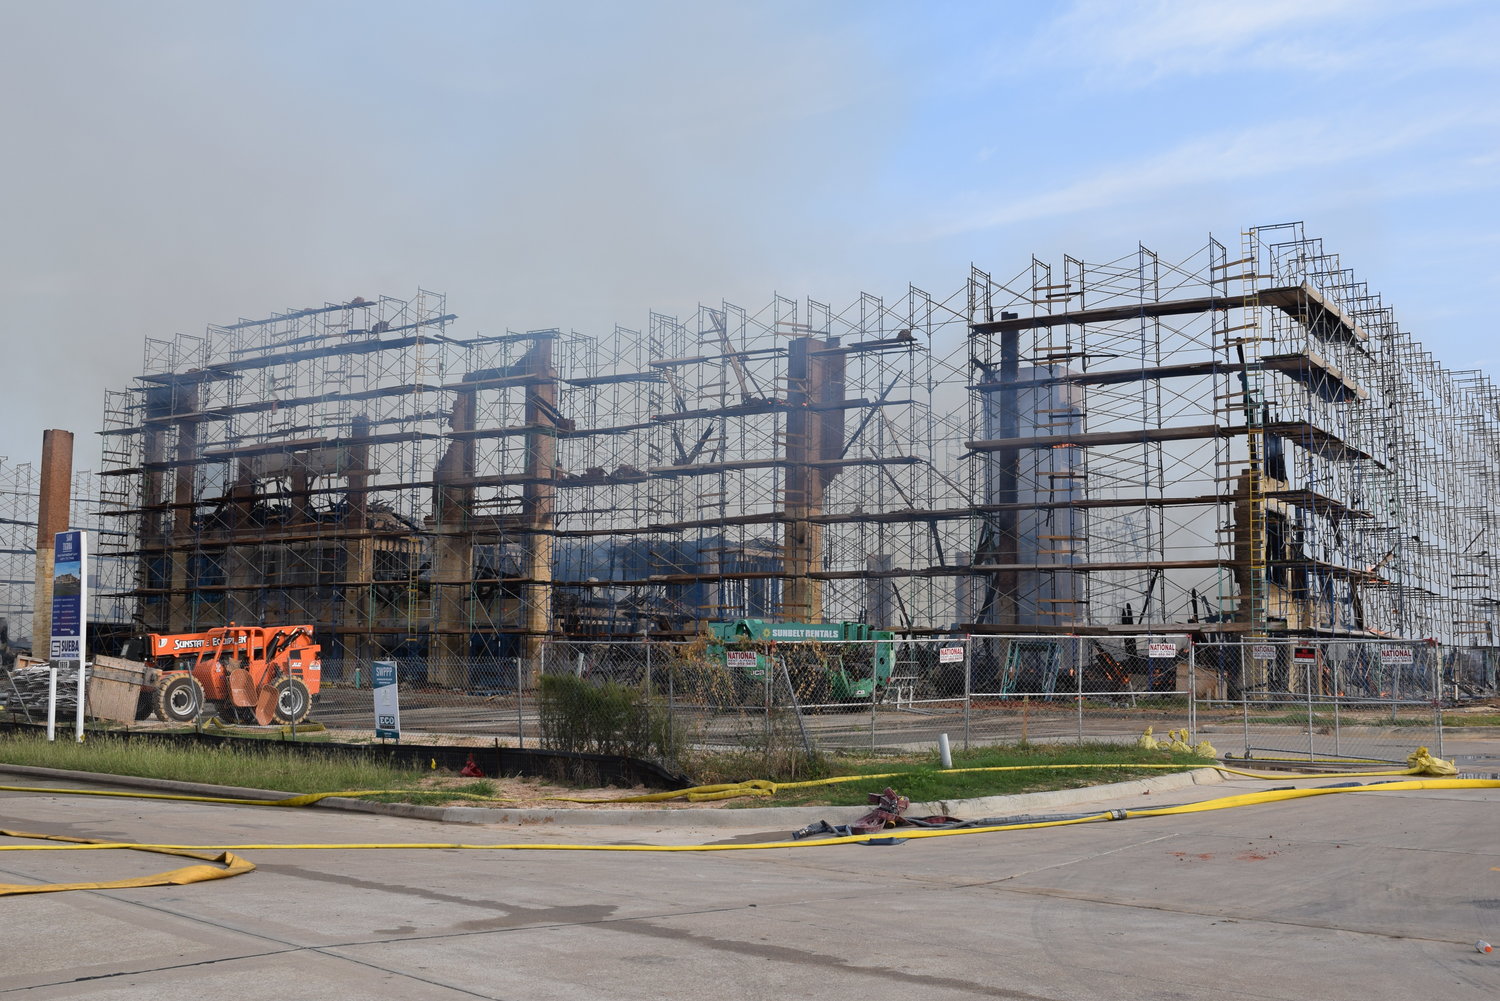 The scaffolding around the site created an obstacle for firefighters concerned about fighting the blaze safely.